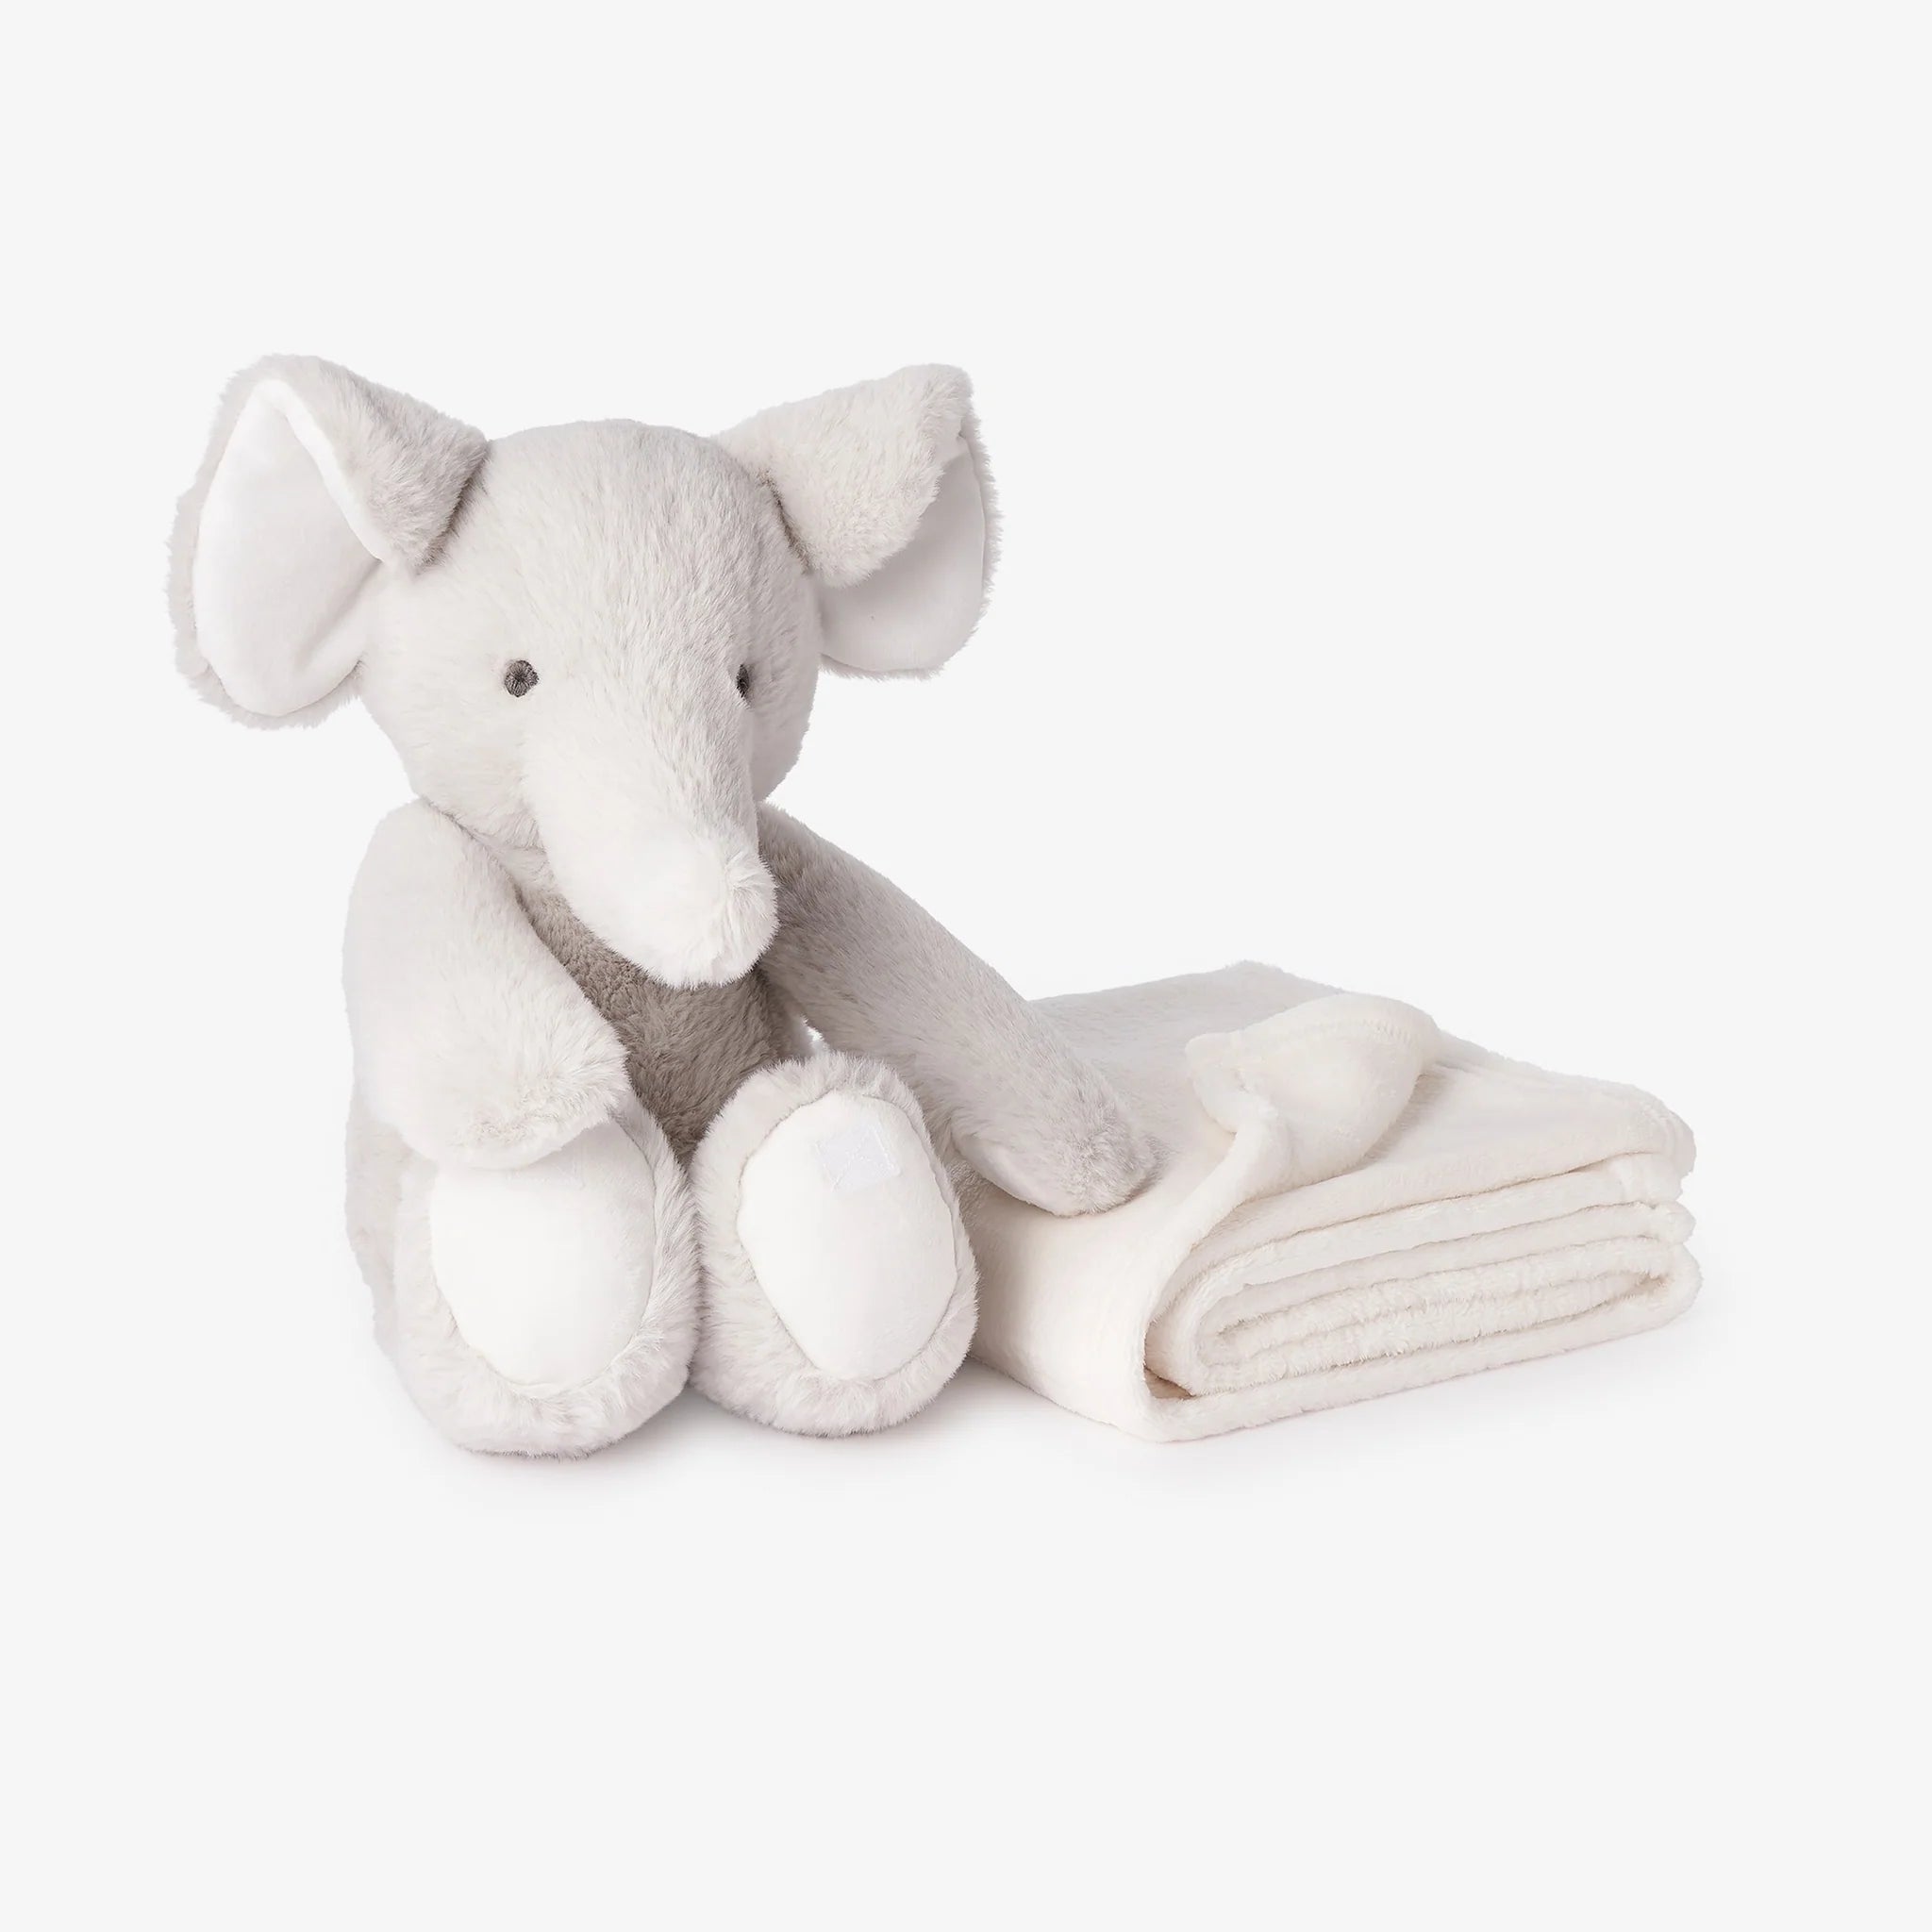 Elephant Bedtime Huggie Plush Toy with Blanket.